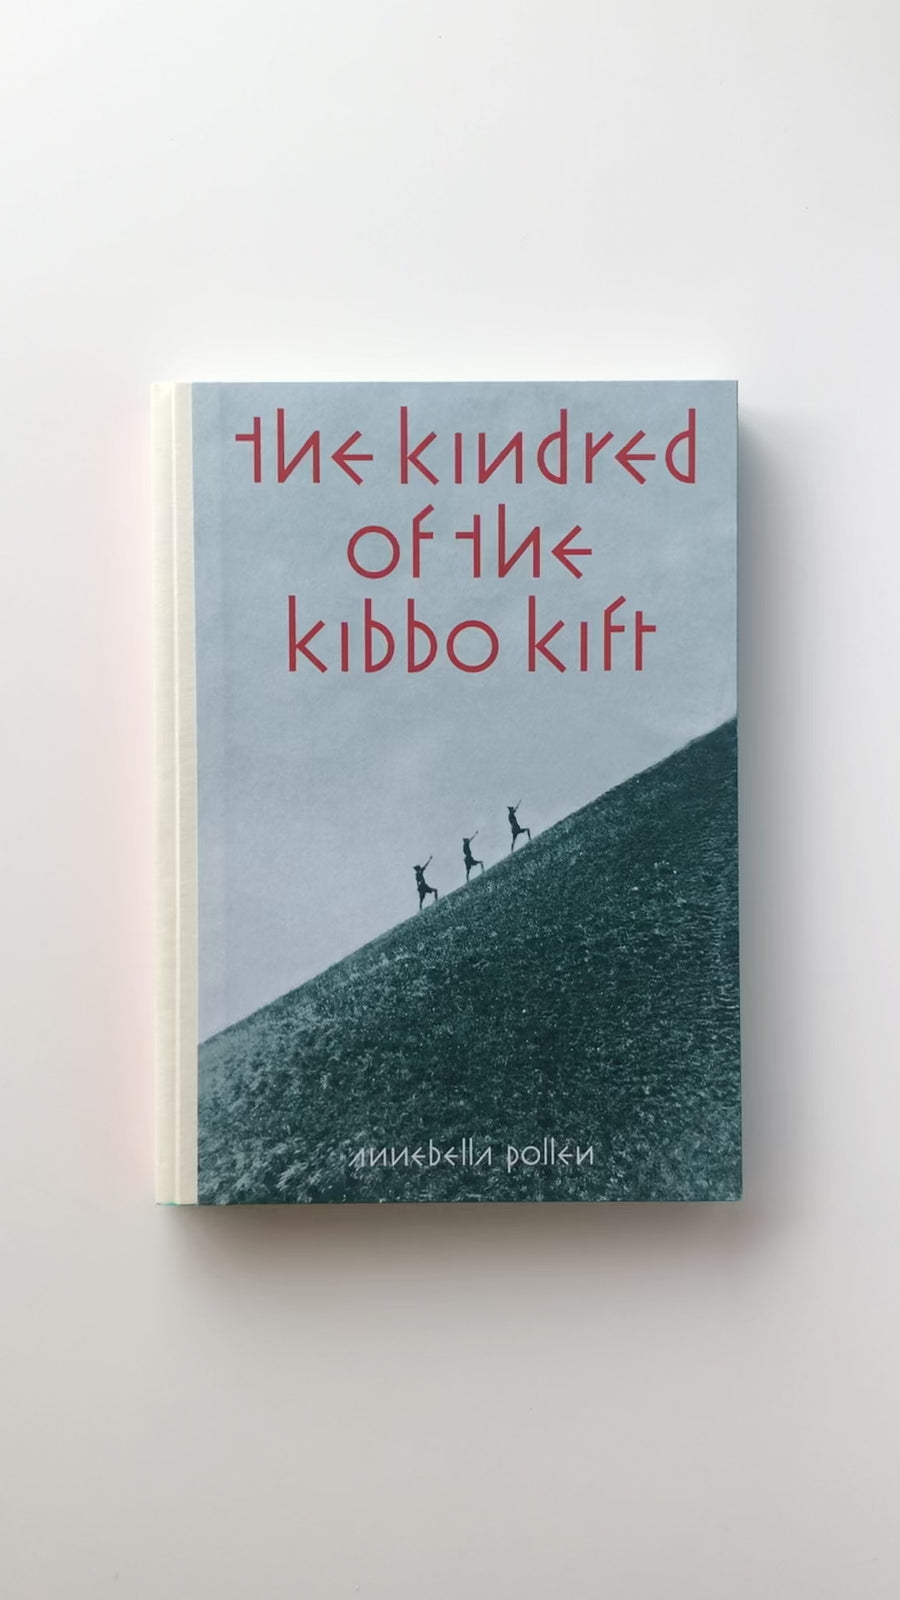 <tc>The Kindred of the Kibbo Kift: Intellectual Barbarians</tc>